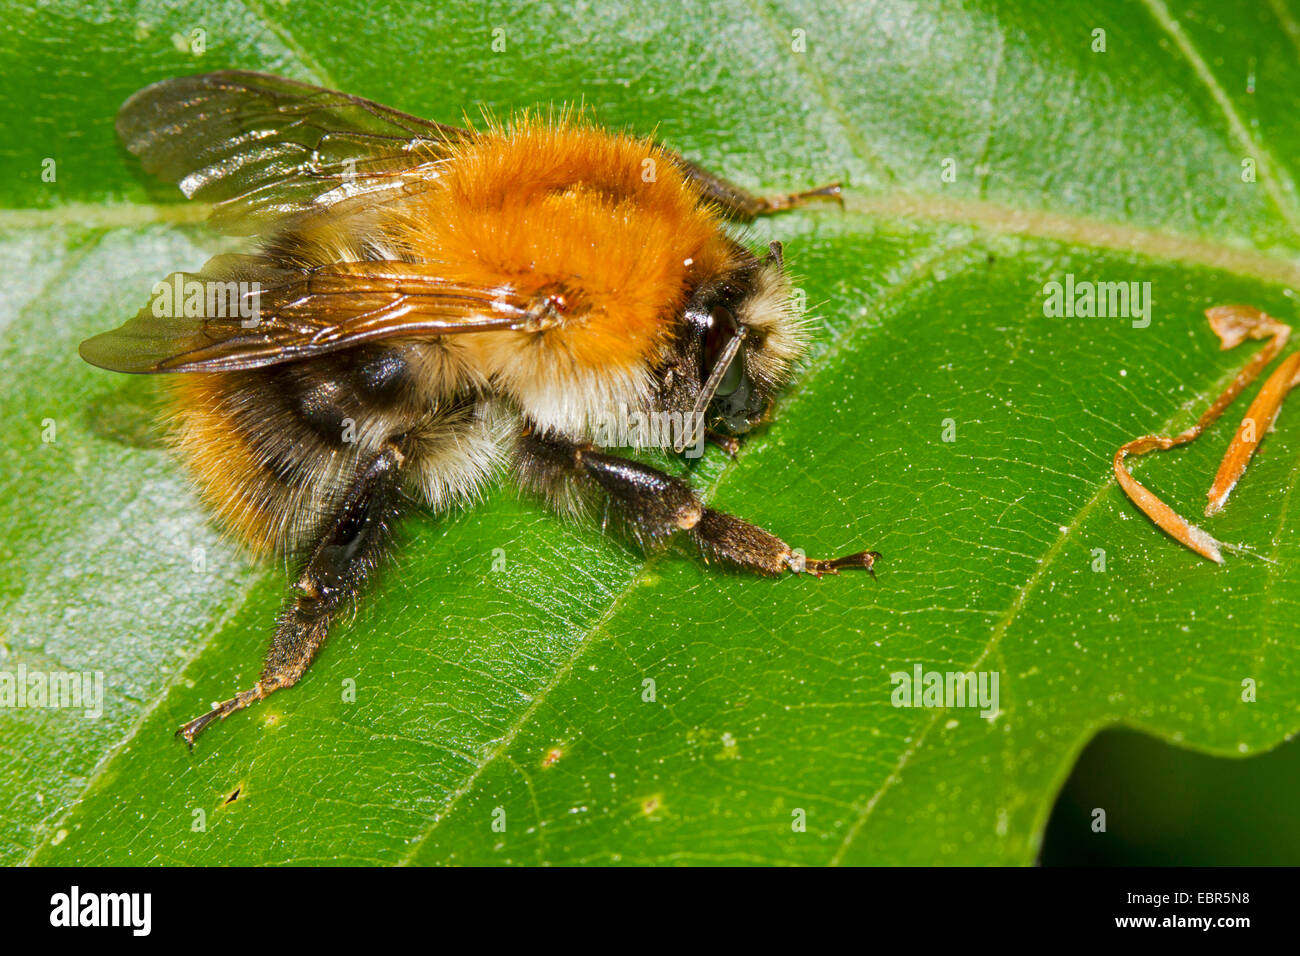 carder bee, common carder bee (Bombus pascuorum, Bombus agrorum), resting on a leaf, Germany Stock Photo